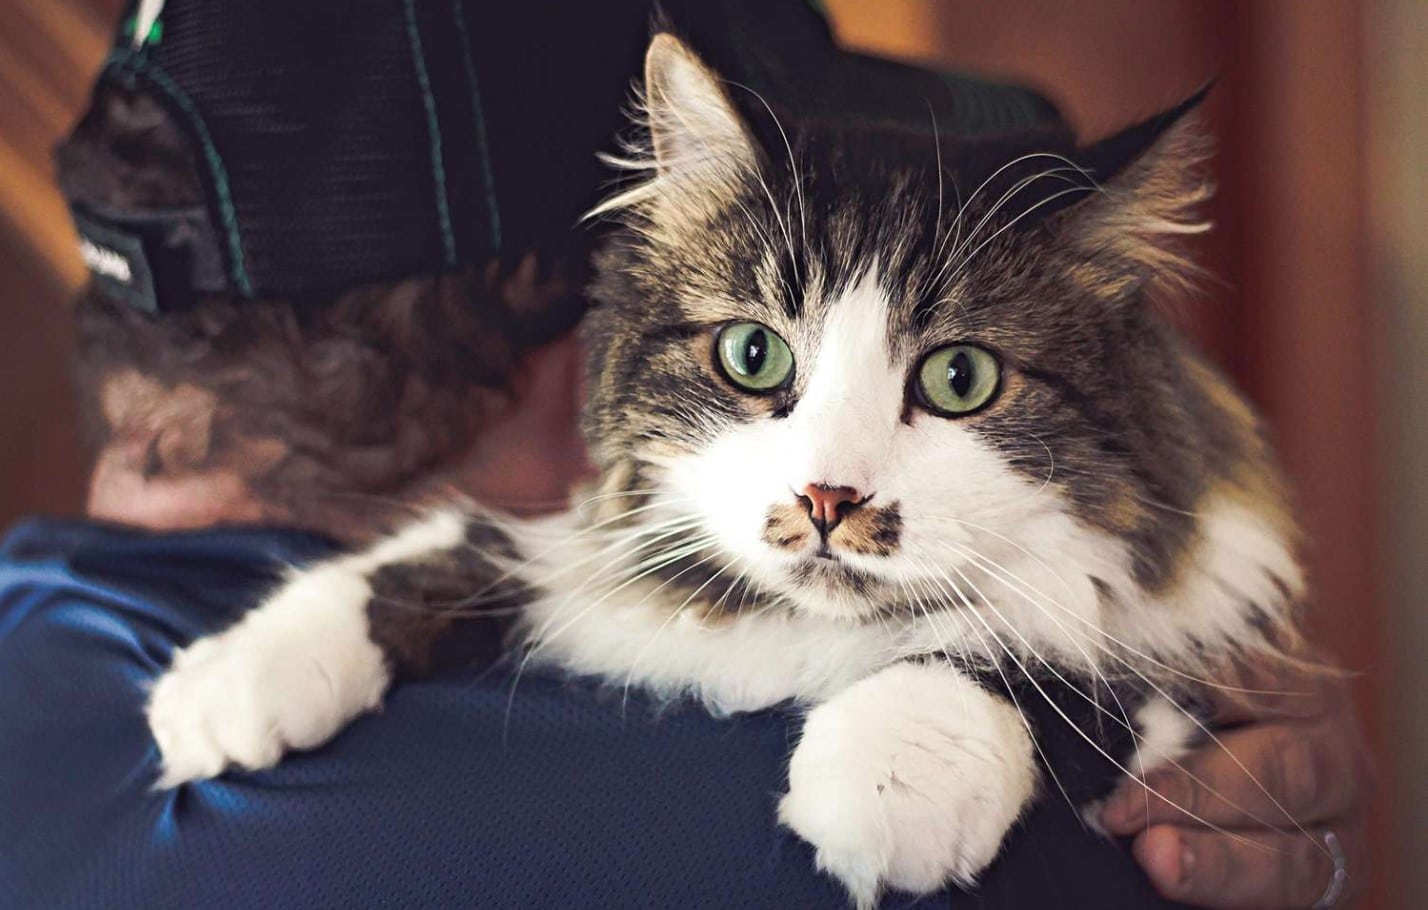 The Ragamuffin is a cat breed with big eyes